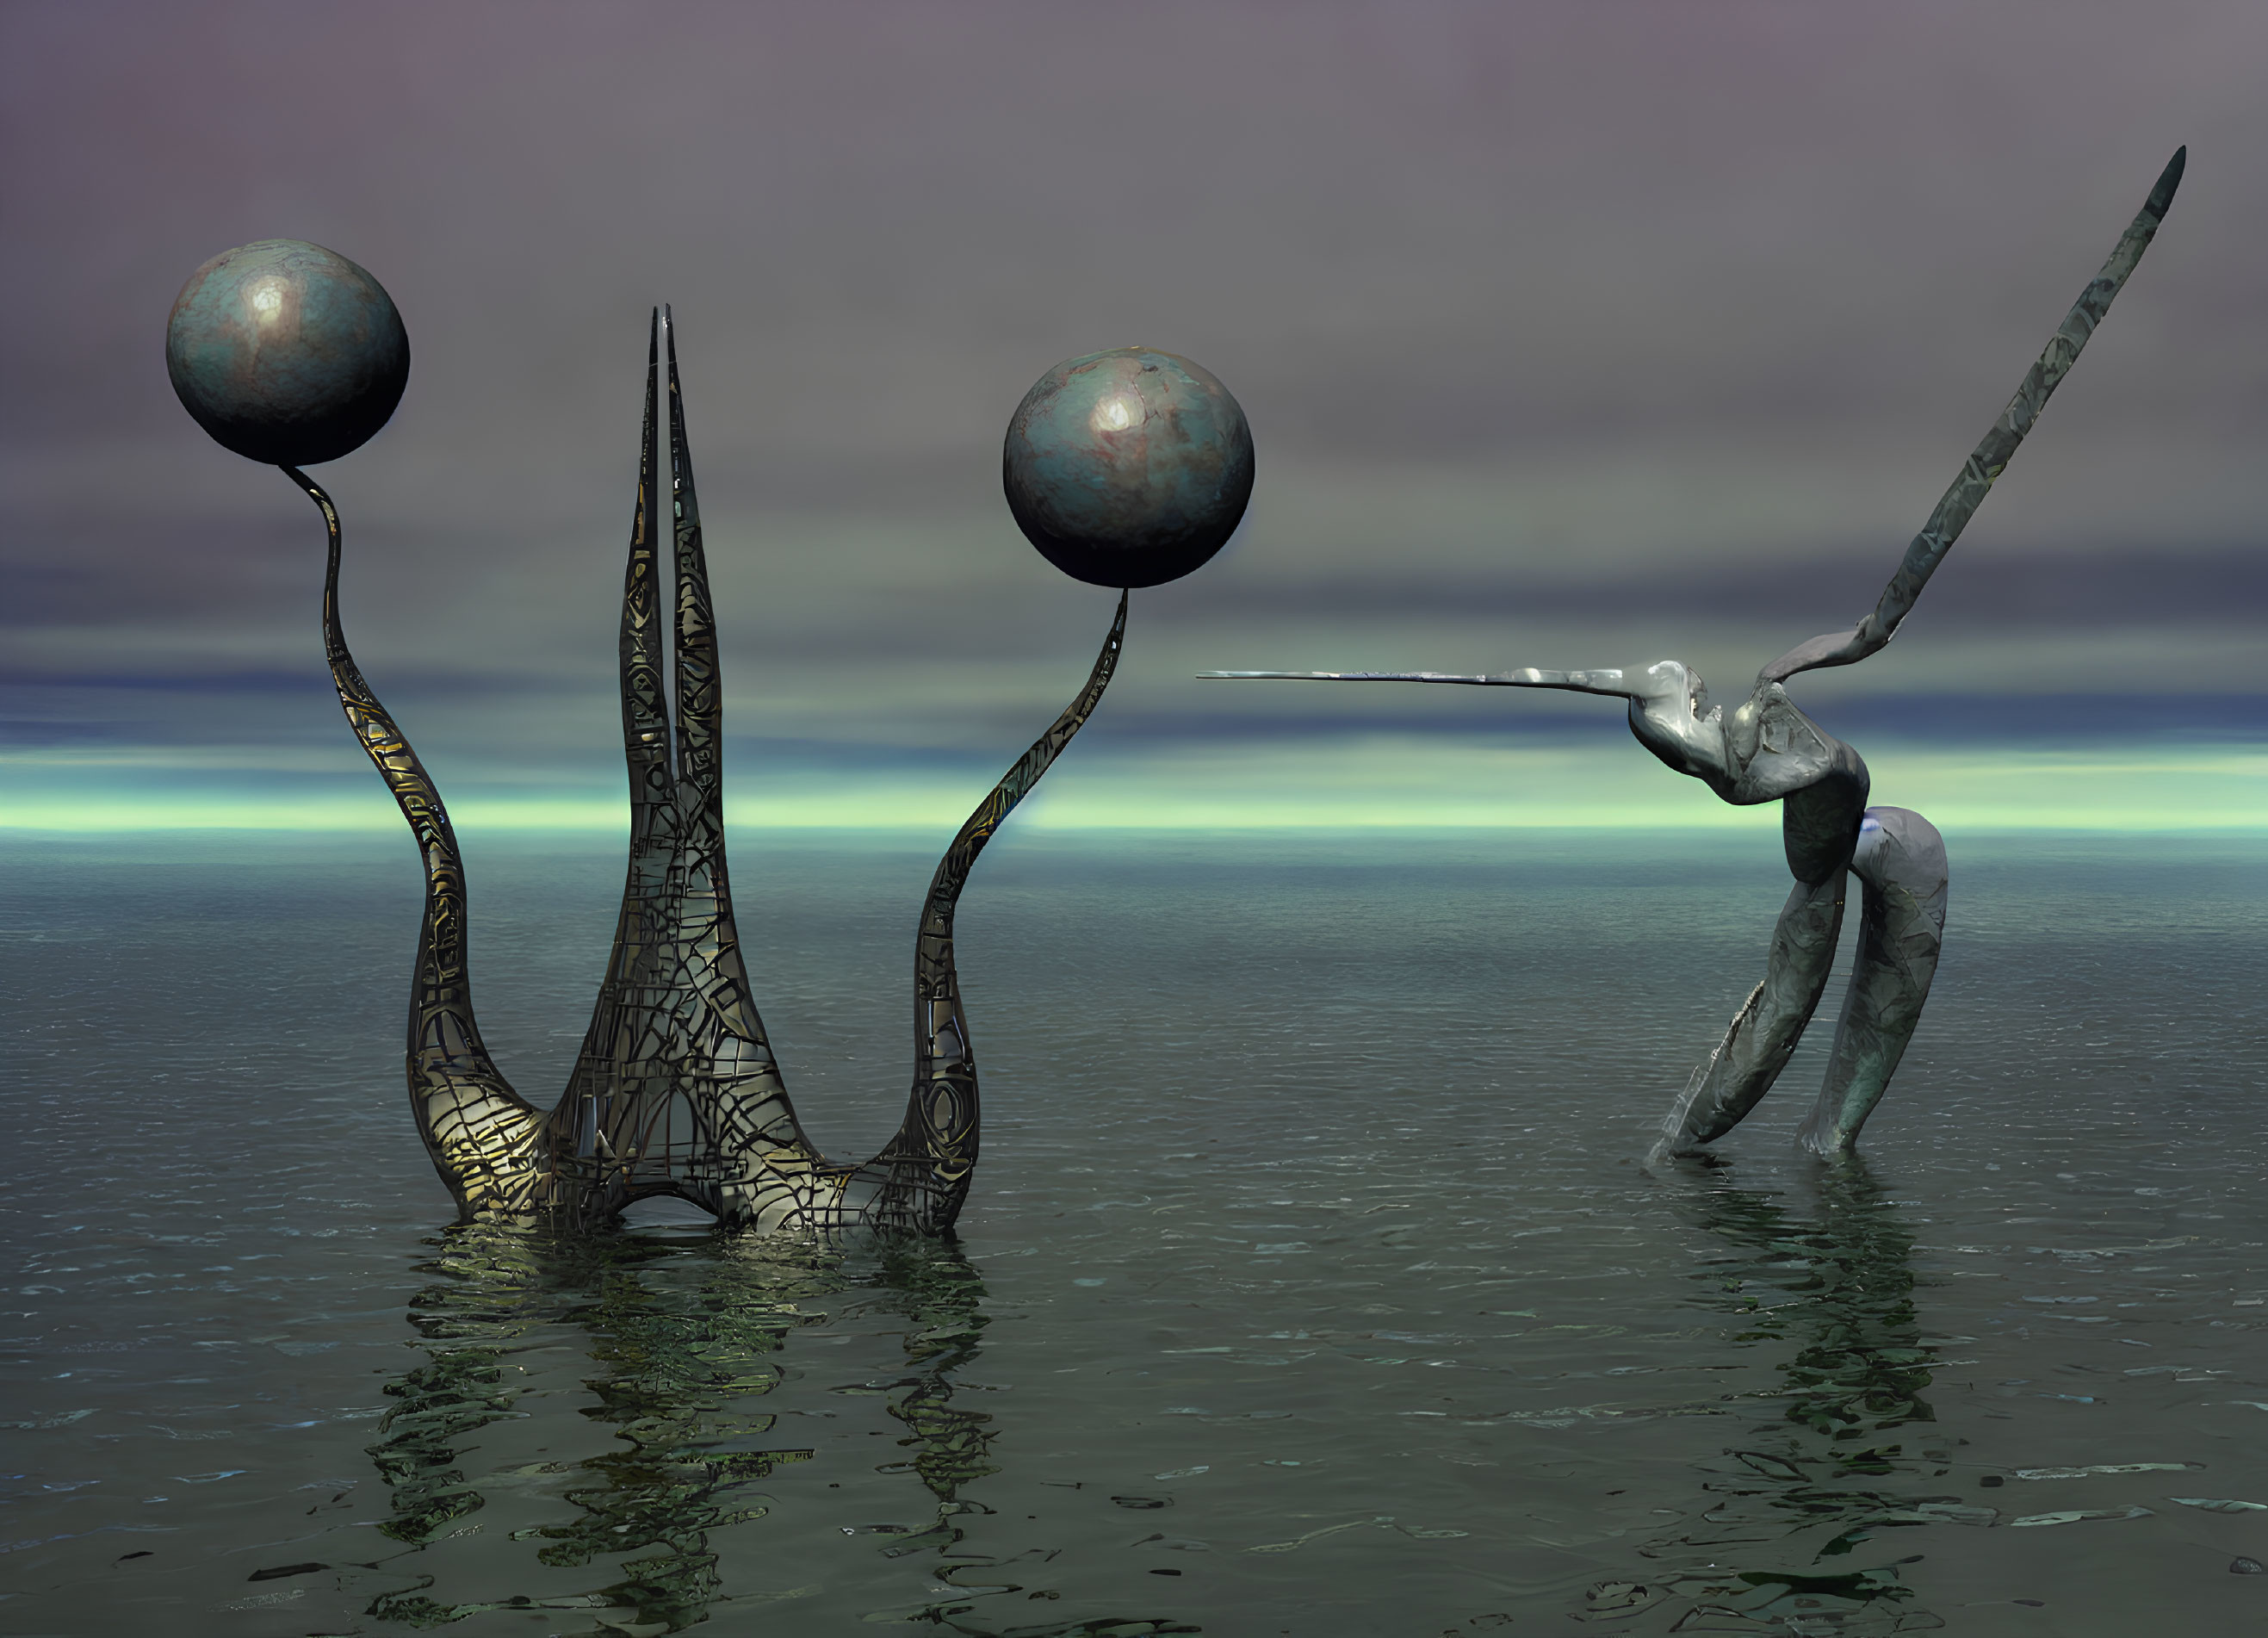 Surreal landscape with humanoid figure, spear, abstract structures, and orbs under cloudy sky